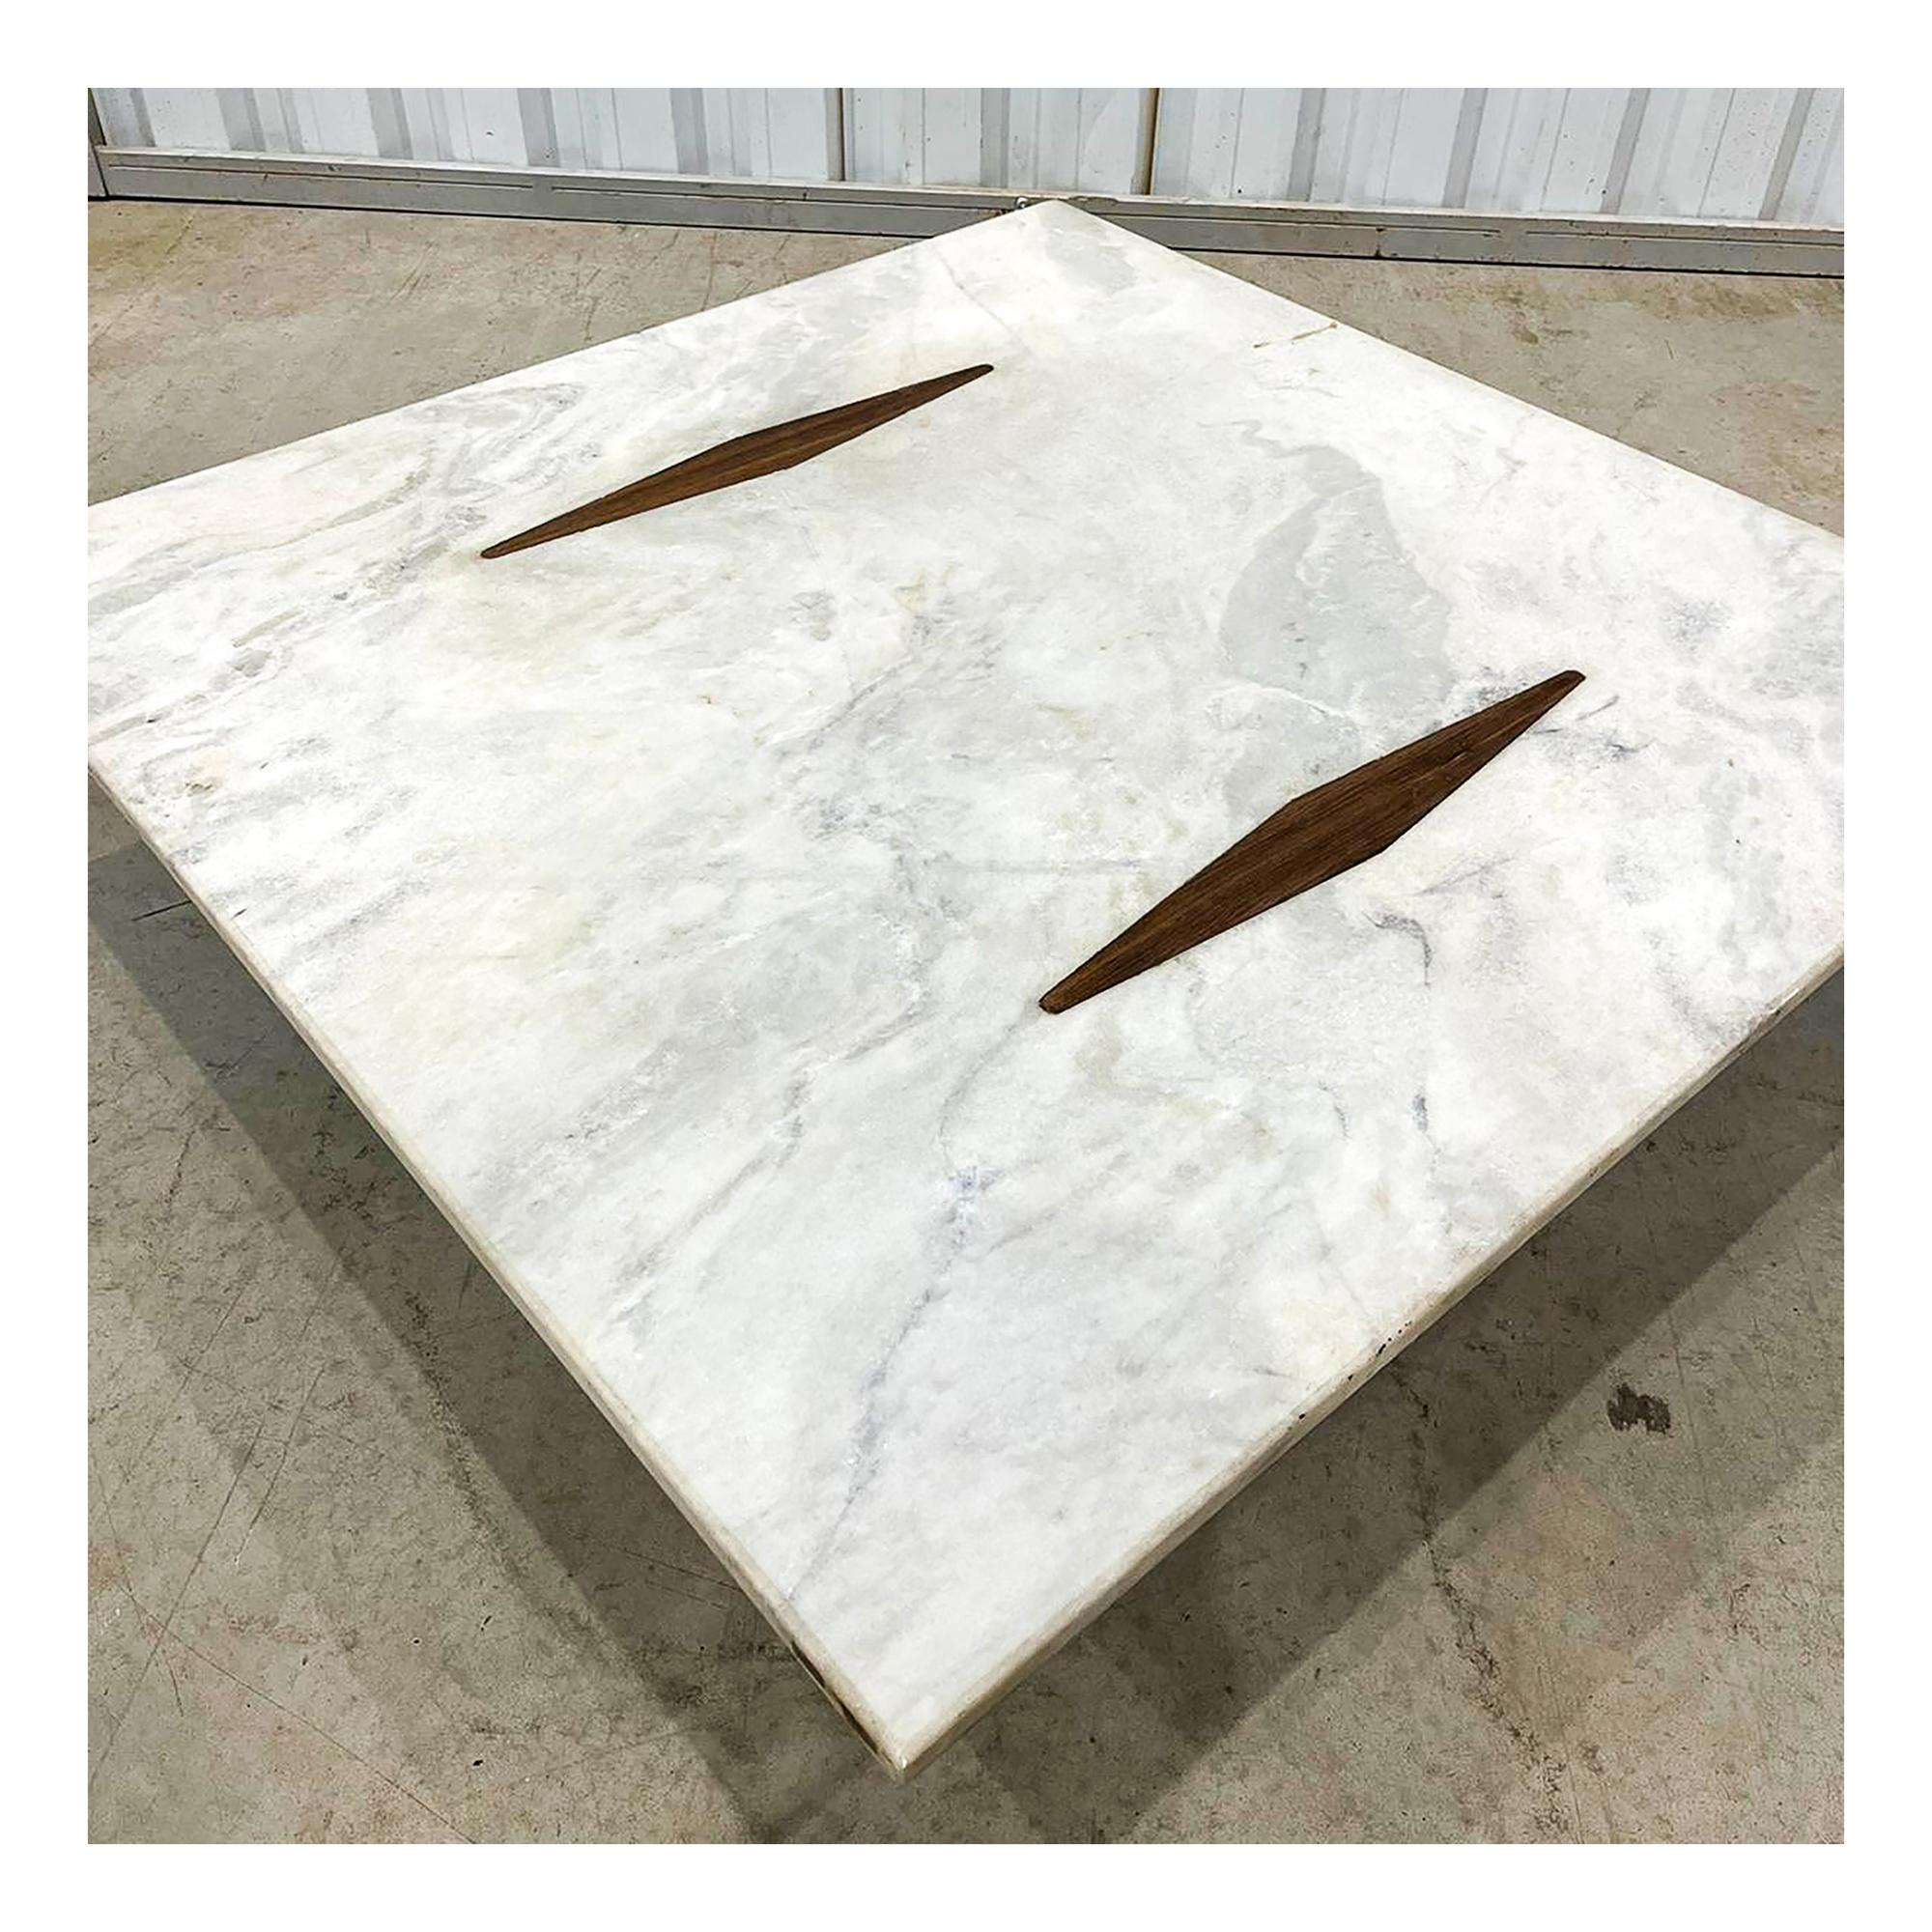 Available now, this Mid-Century Modern Coffee Table made in Wood & Marble by Jorge Zalszupin in Brazil in 1959 is a masterpiece!

The “Limestone” coffee table is a stunning example of minimalist design. Its use of materials including rosewood legs